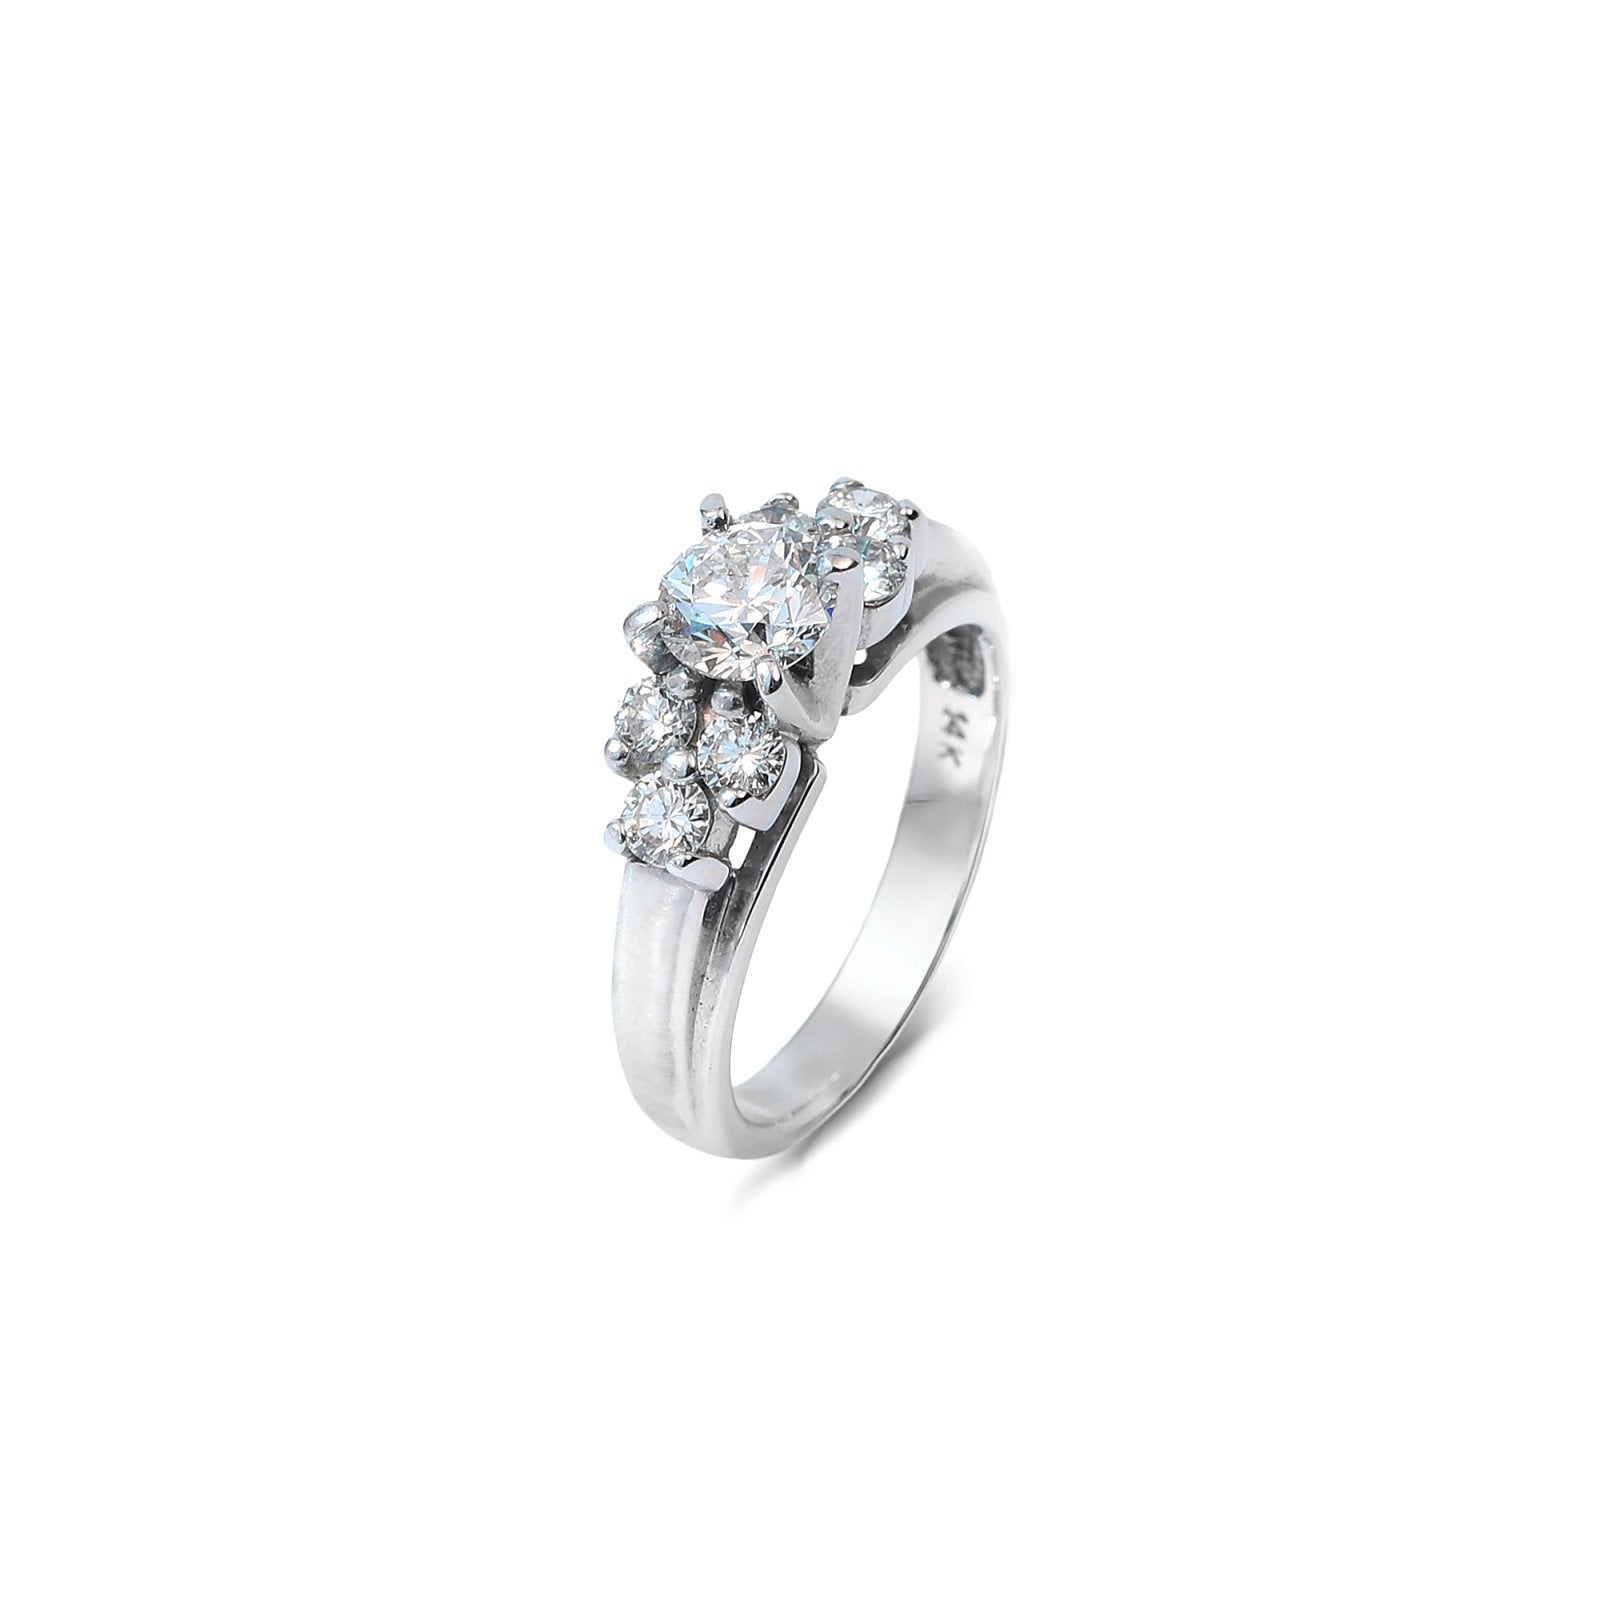 White Gold Diamond Engagement Ring Centre Stone: Round Cut 0.6ct.Side Diamonds: 6 Round Cut each 0.1ct. TCW: 1.2ct SI1-2 F-G 14k 4.43gr